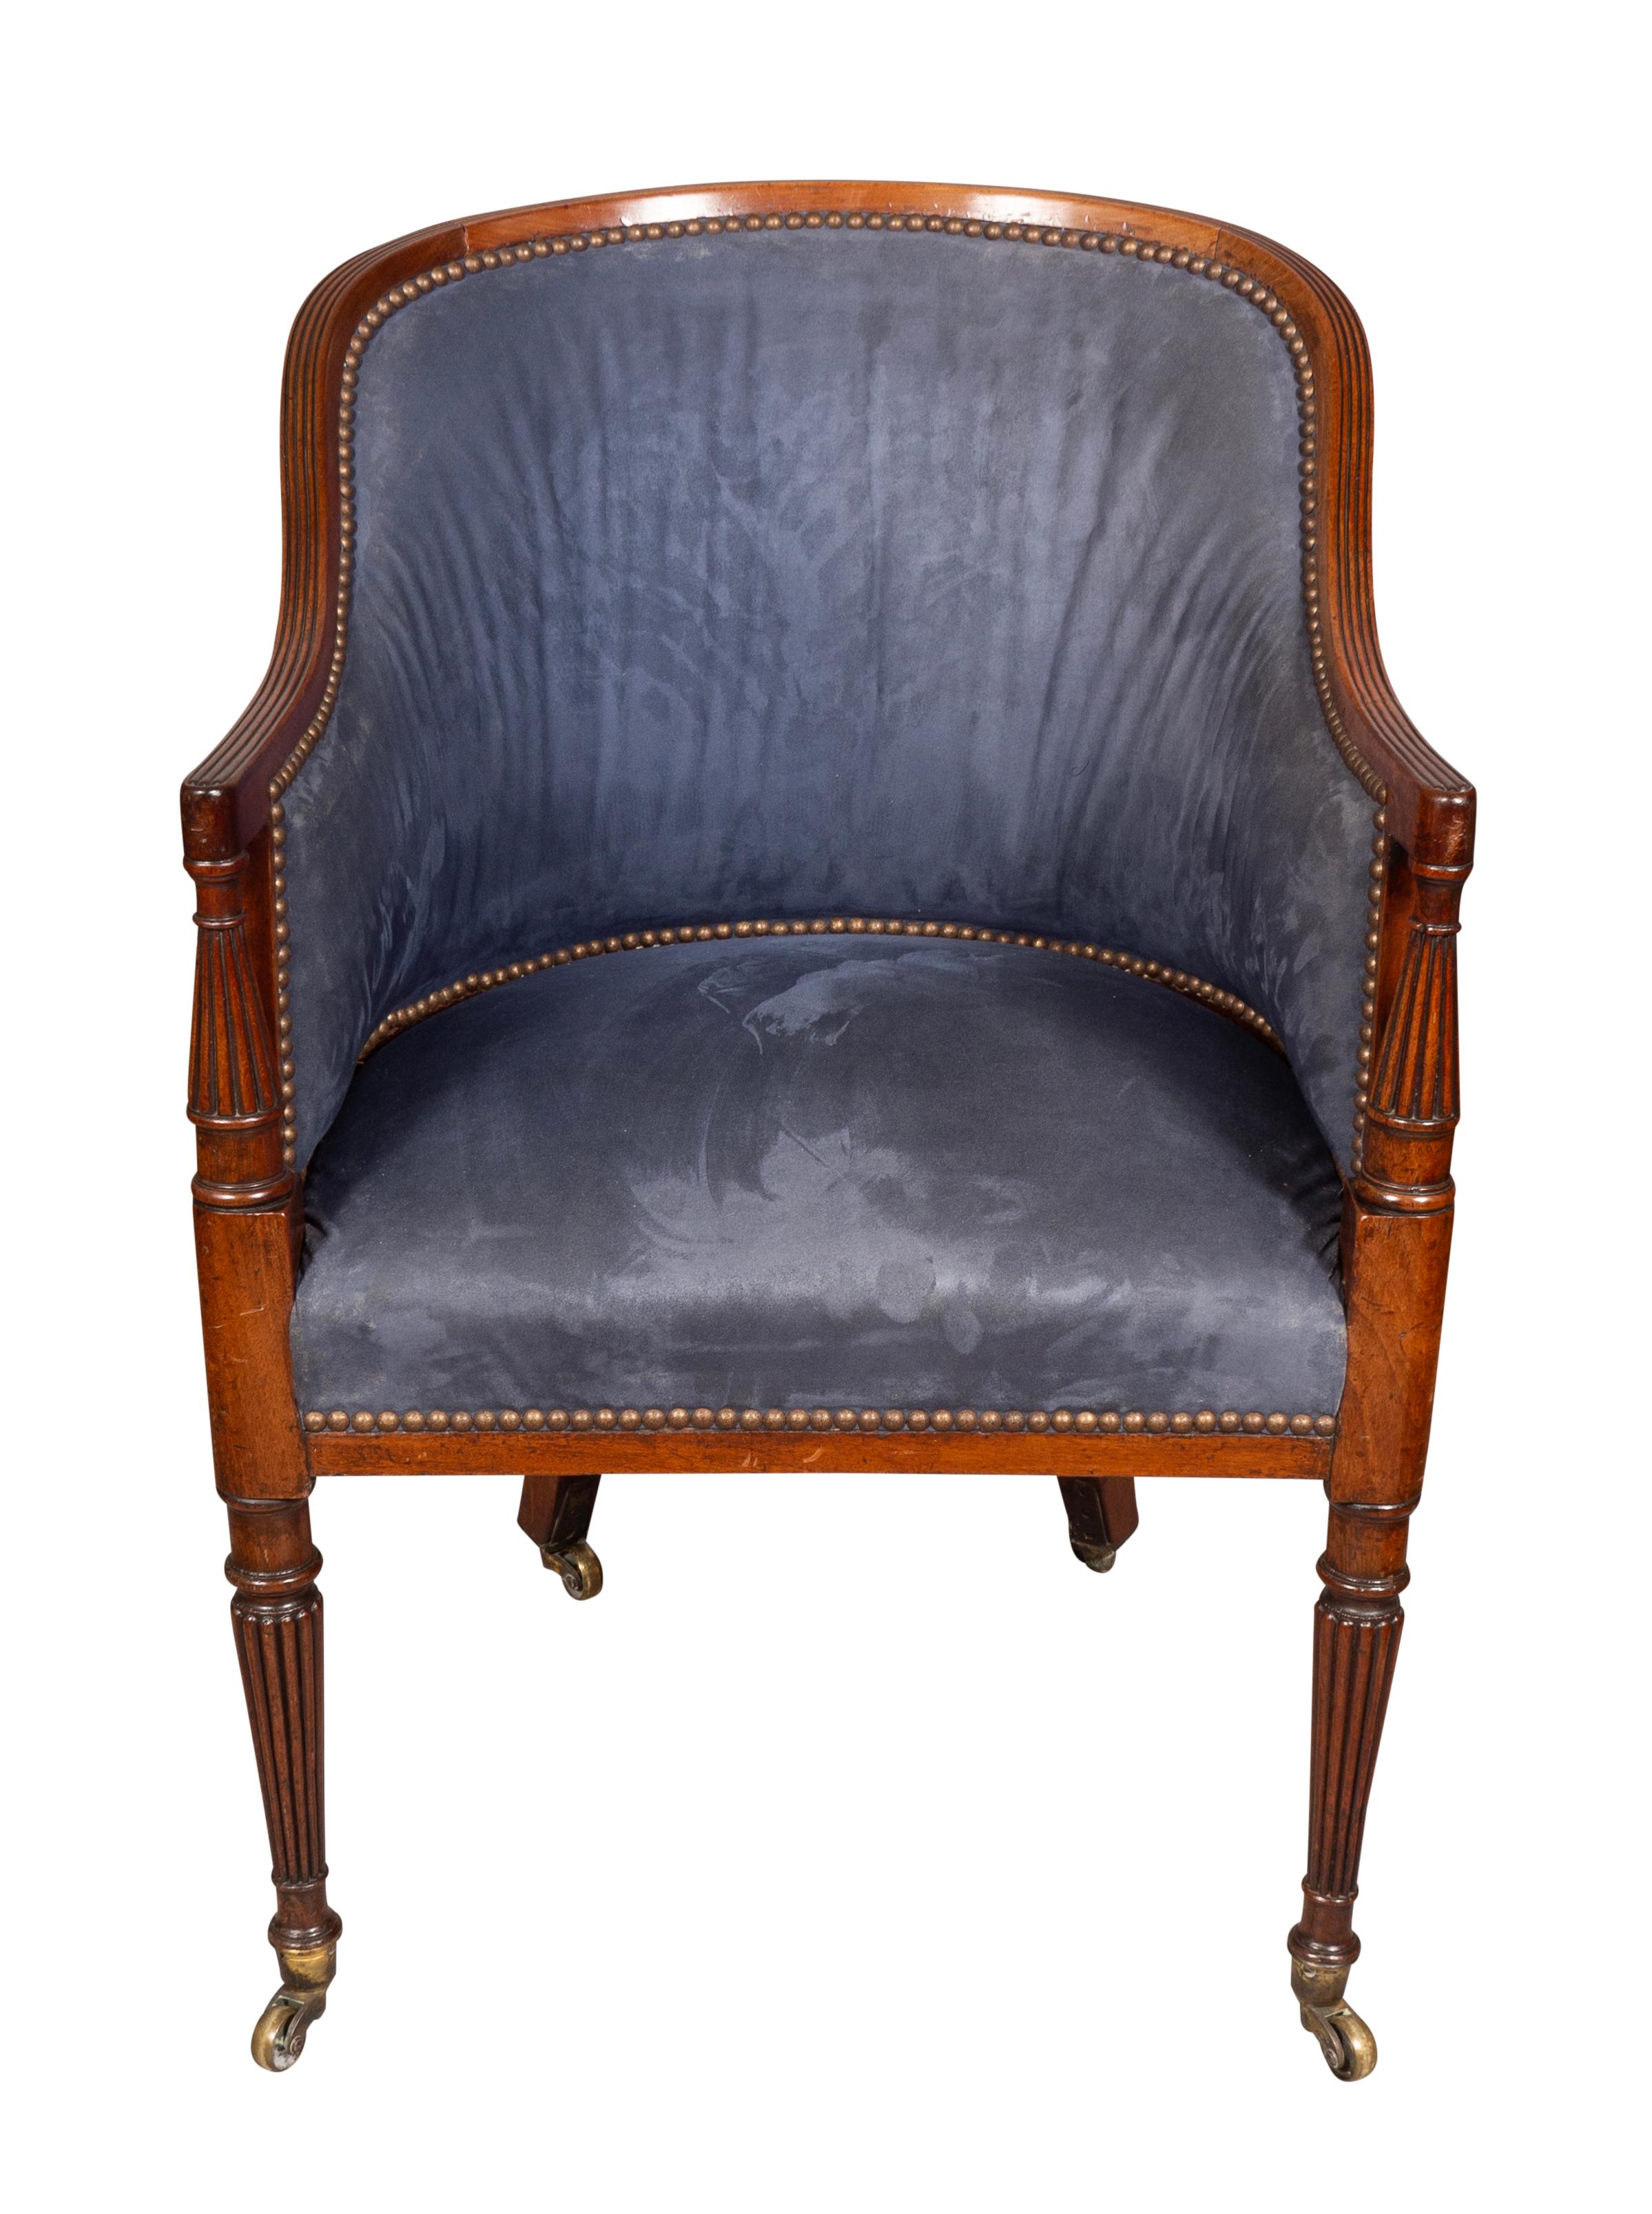 With rounded upholstered back with mahogany frame.The ends of the arms with turned reeded supports. Upholstered seat with tapered reeded legs and ending on casters. Very good condition. Very solid and also comfortable.